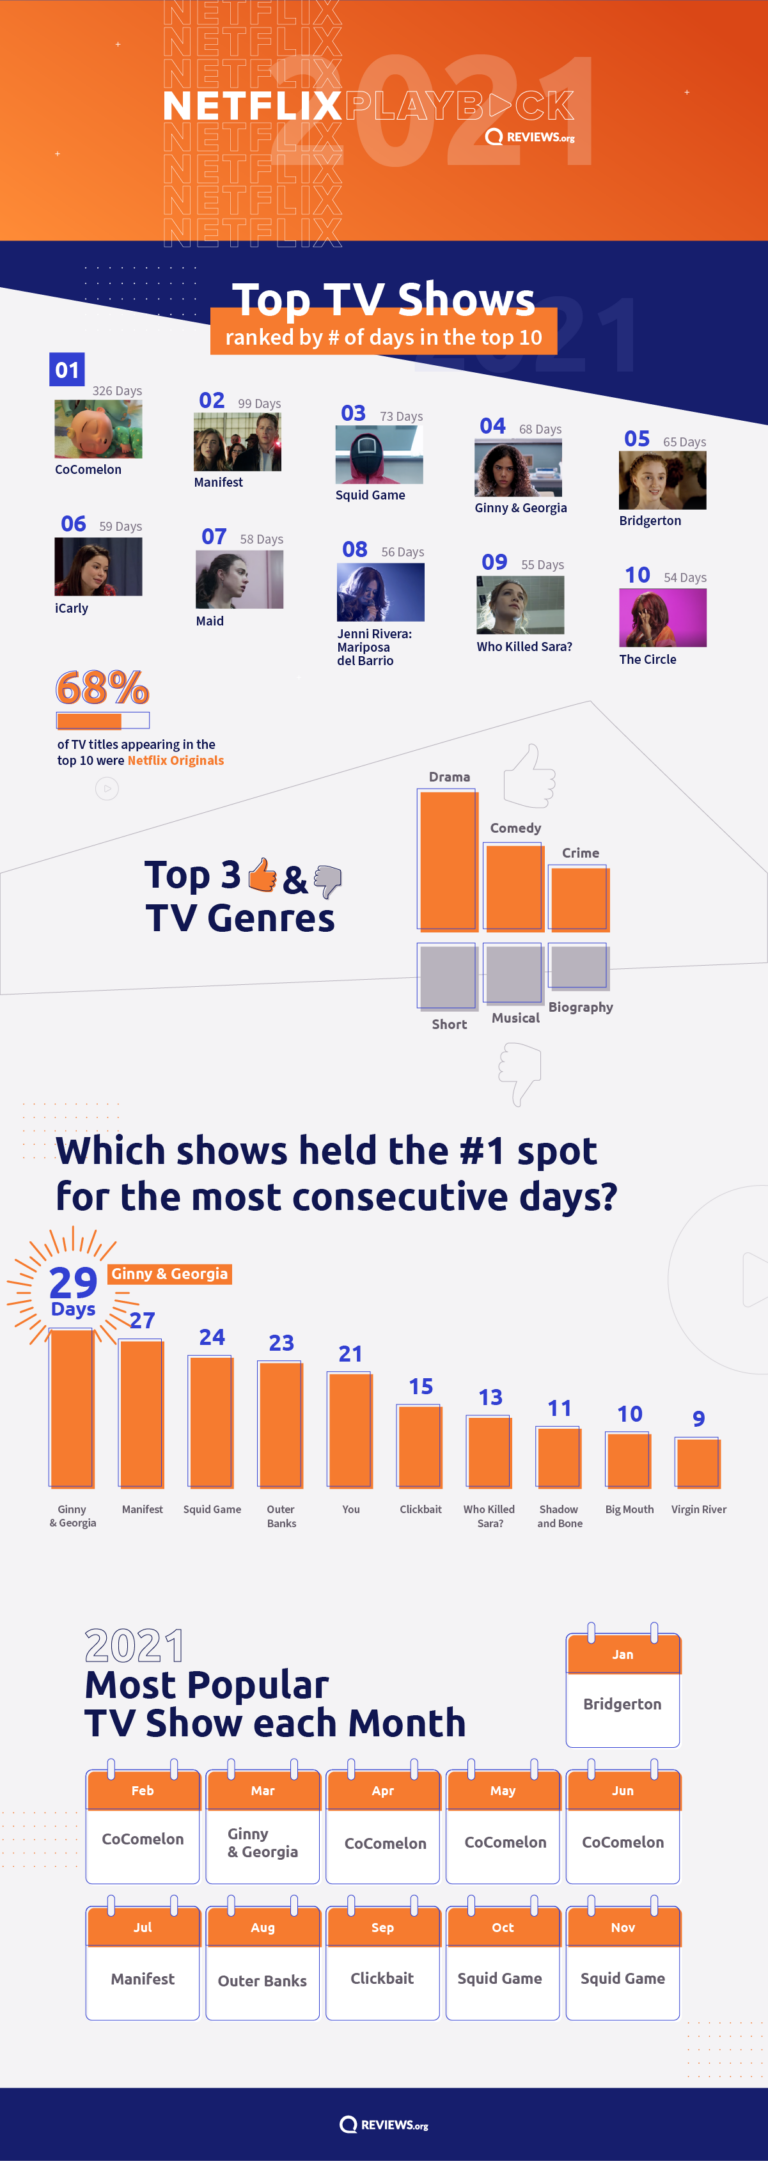 2021's Most Popular TV Shows on Netflix